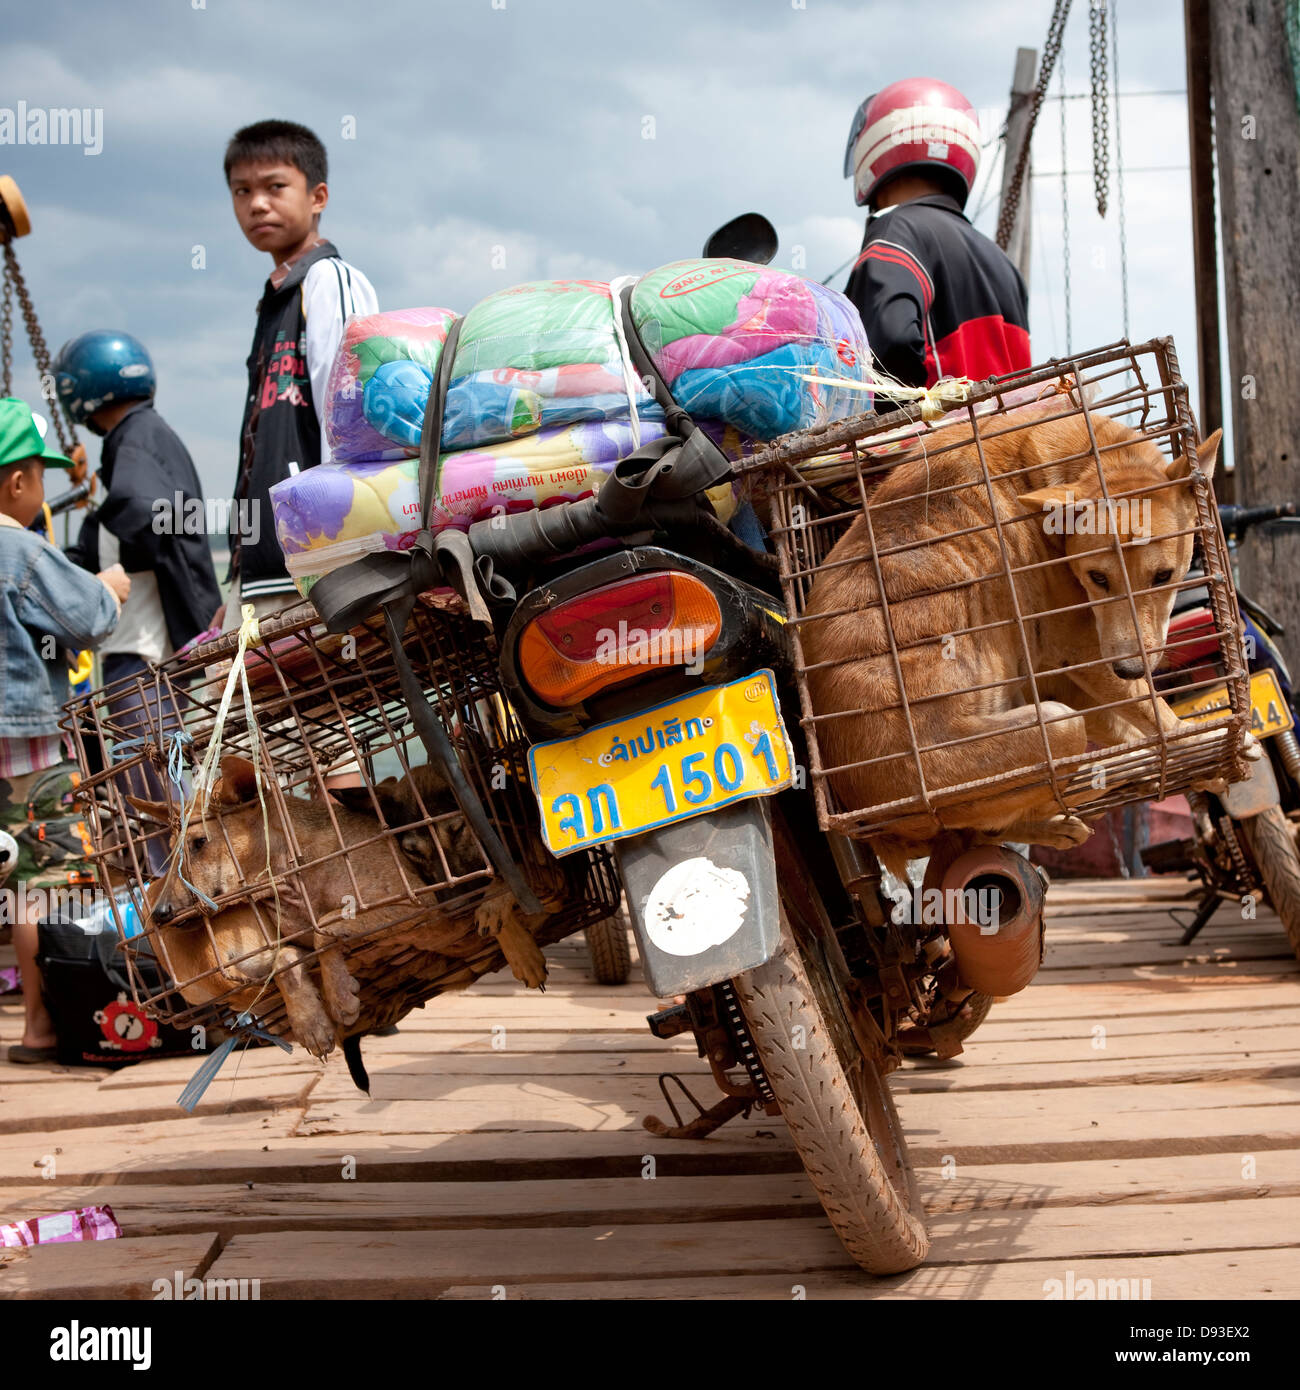 Dogs For Restaurant In Cages A Motobike Phonsaad, Laos Stock Photo